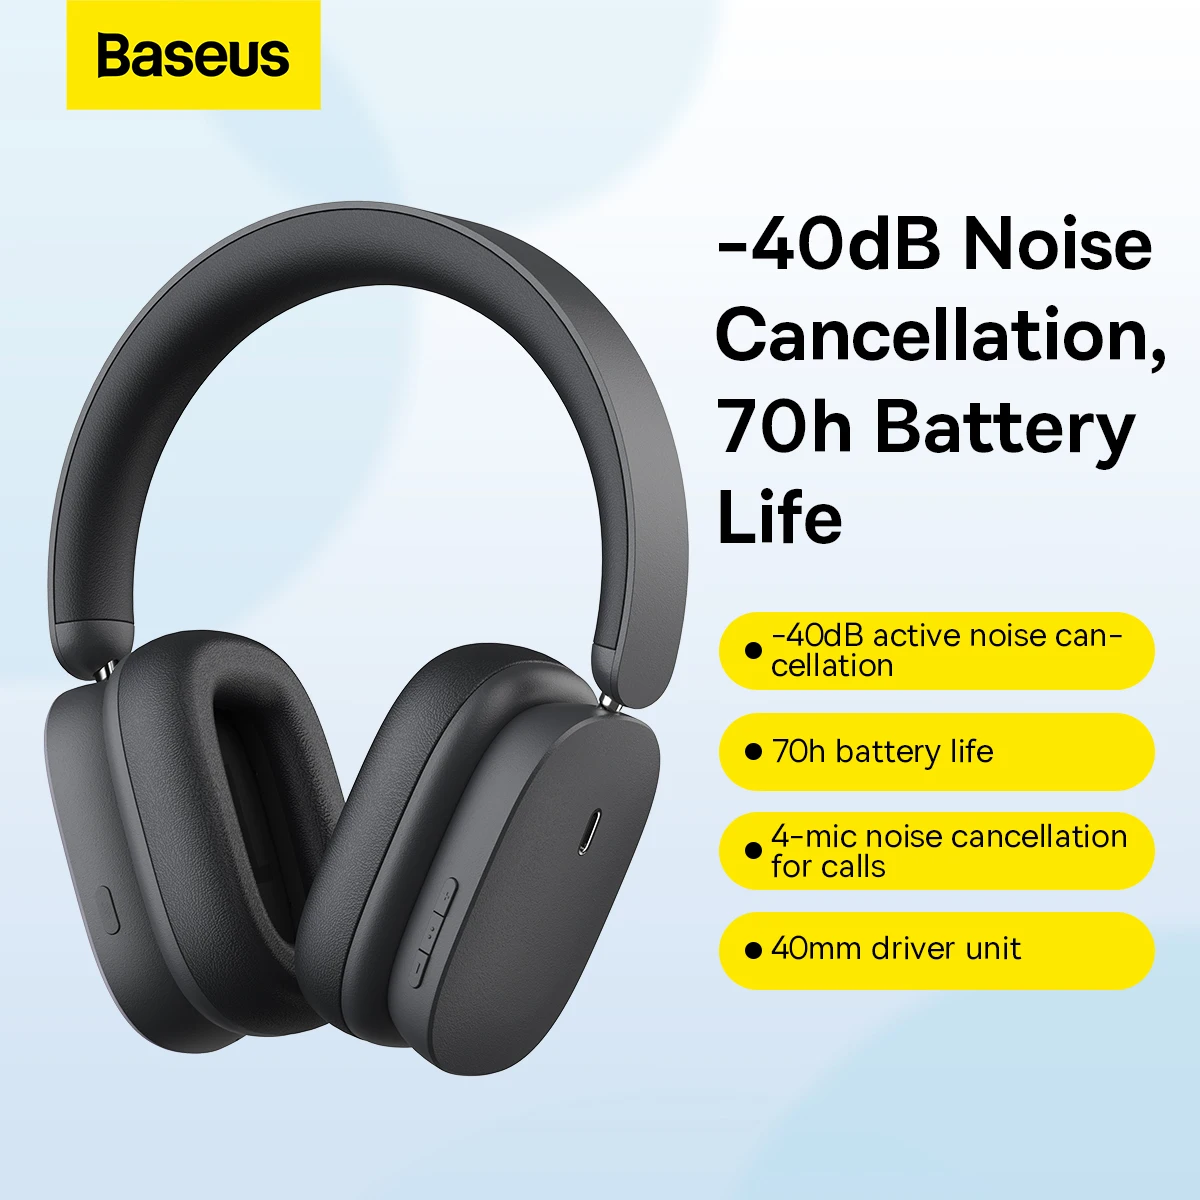 

Baseus H1 ANC Bluetooth 5.2 Headsets Wireless Headphones, 40db Active Noise Cancellation, 70h Battery Life, 40mm Driver Unit